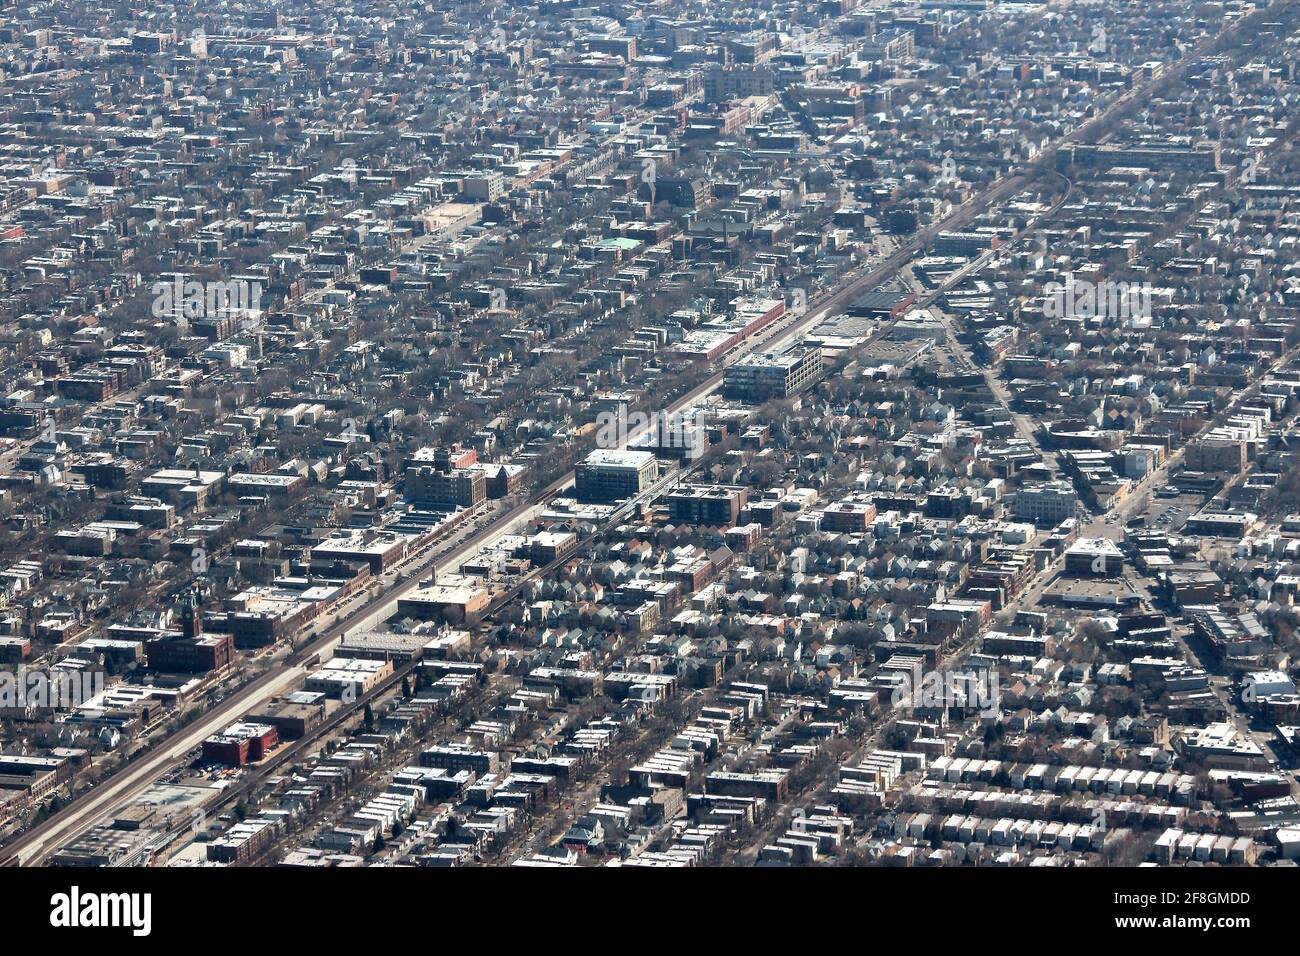 North Center and Lake View districts of Chicago city. Chicago aerial view. Stock Photo